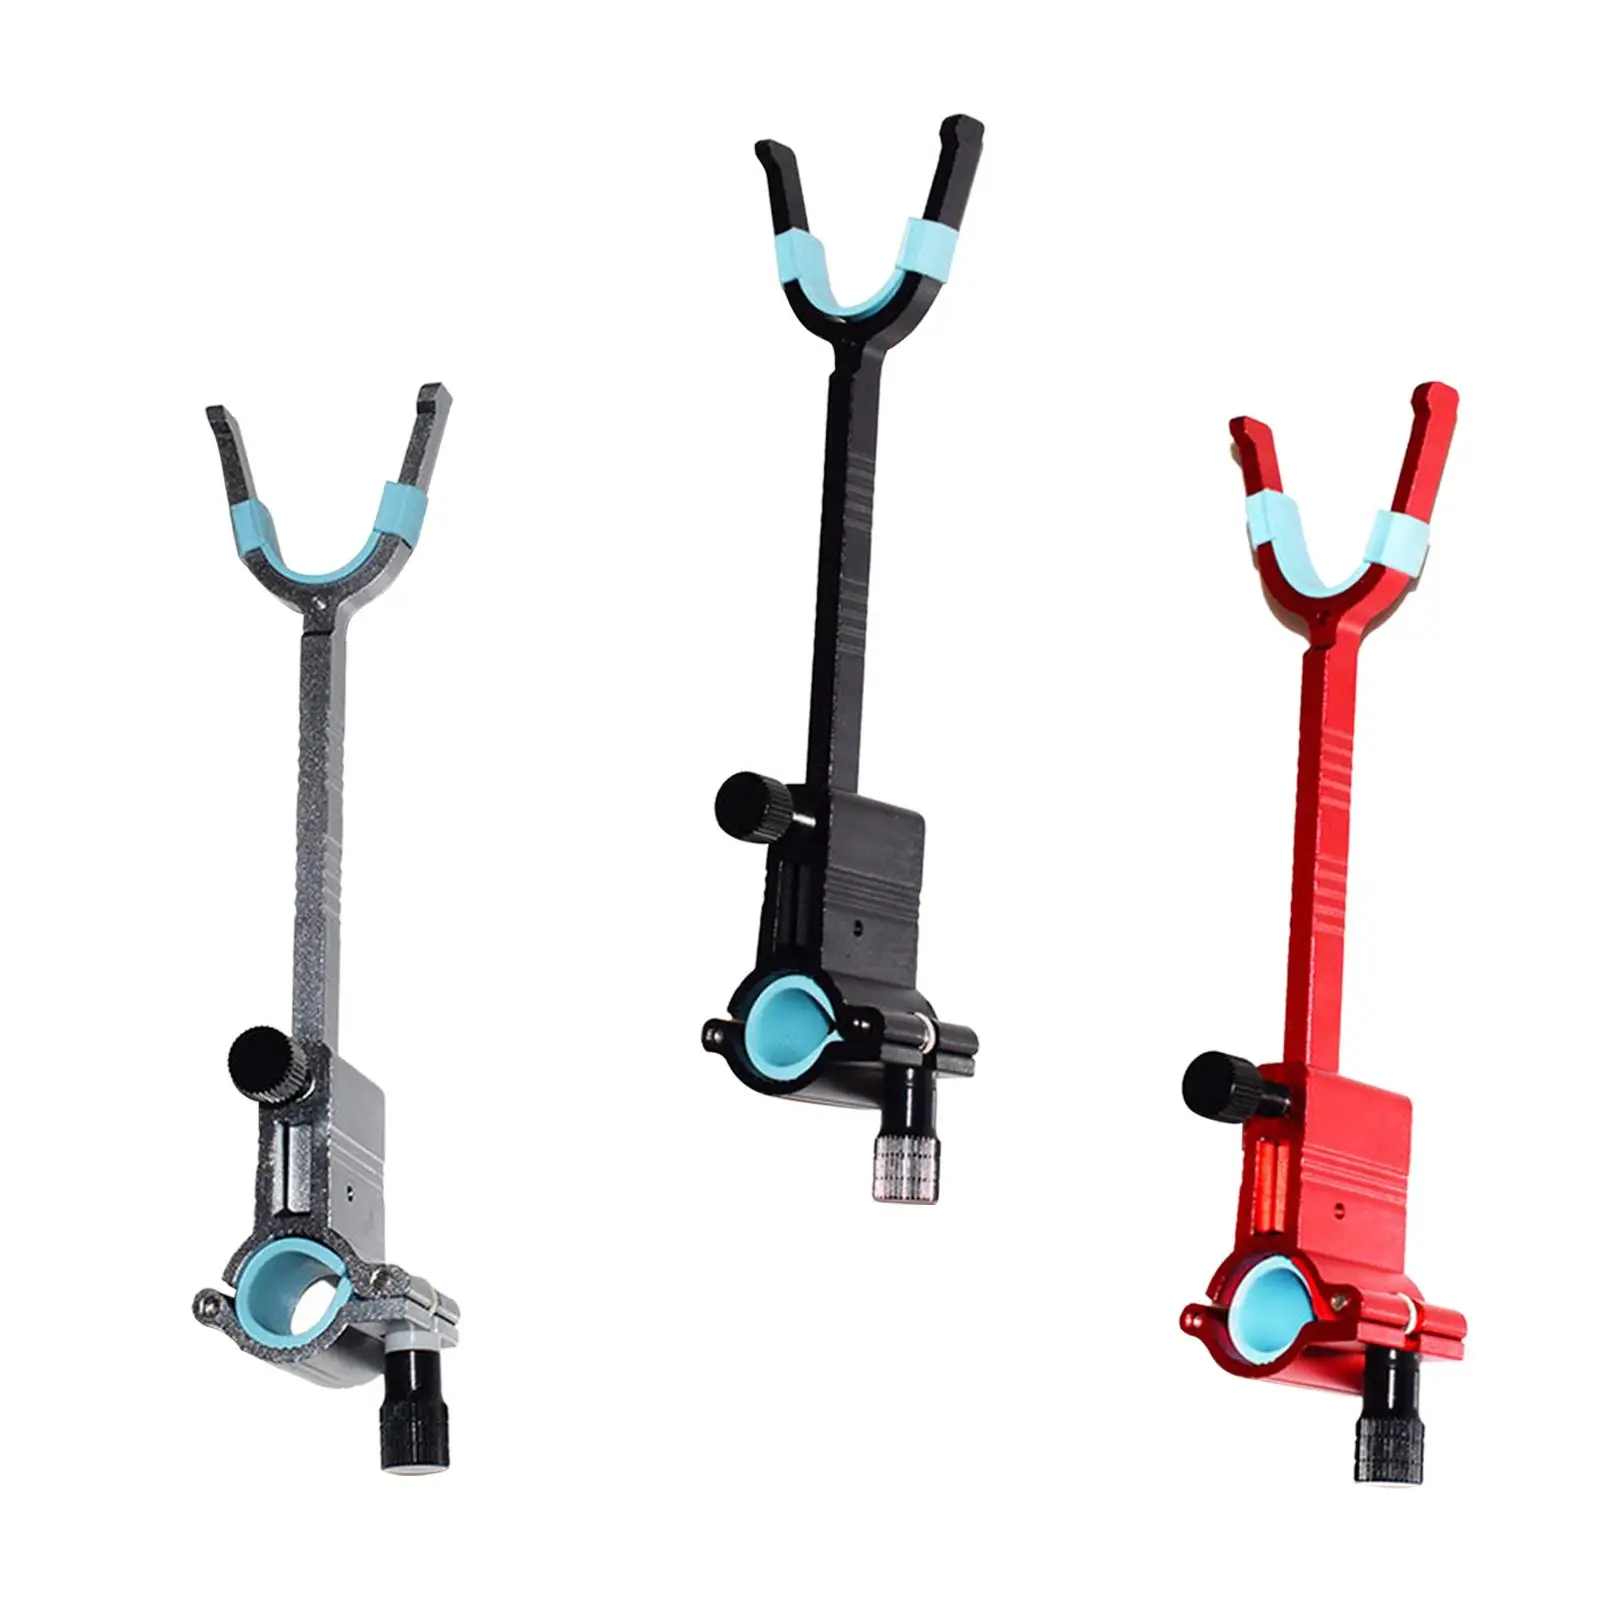 Fishing Rod Holder Stand Metal Extending Rod Rest Portable Fishing Rod Rack for Outdoor Rivers Lakes Fishing Accessories